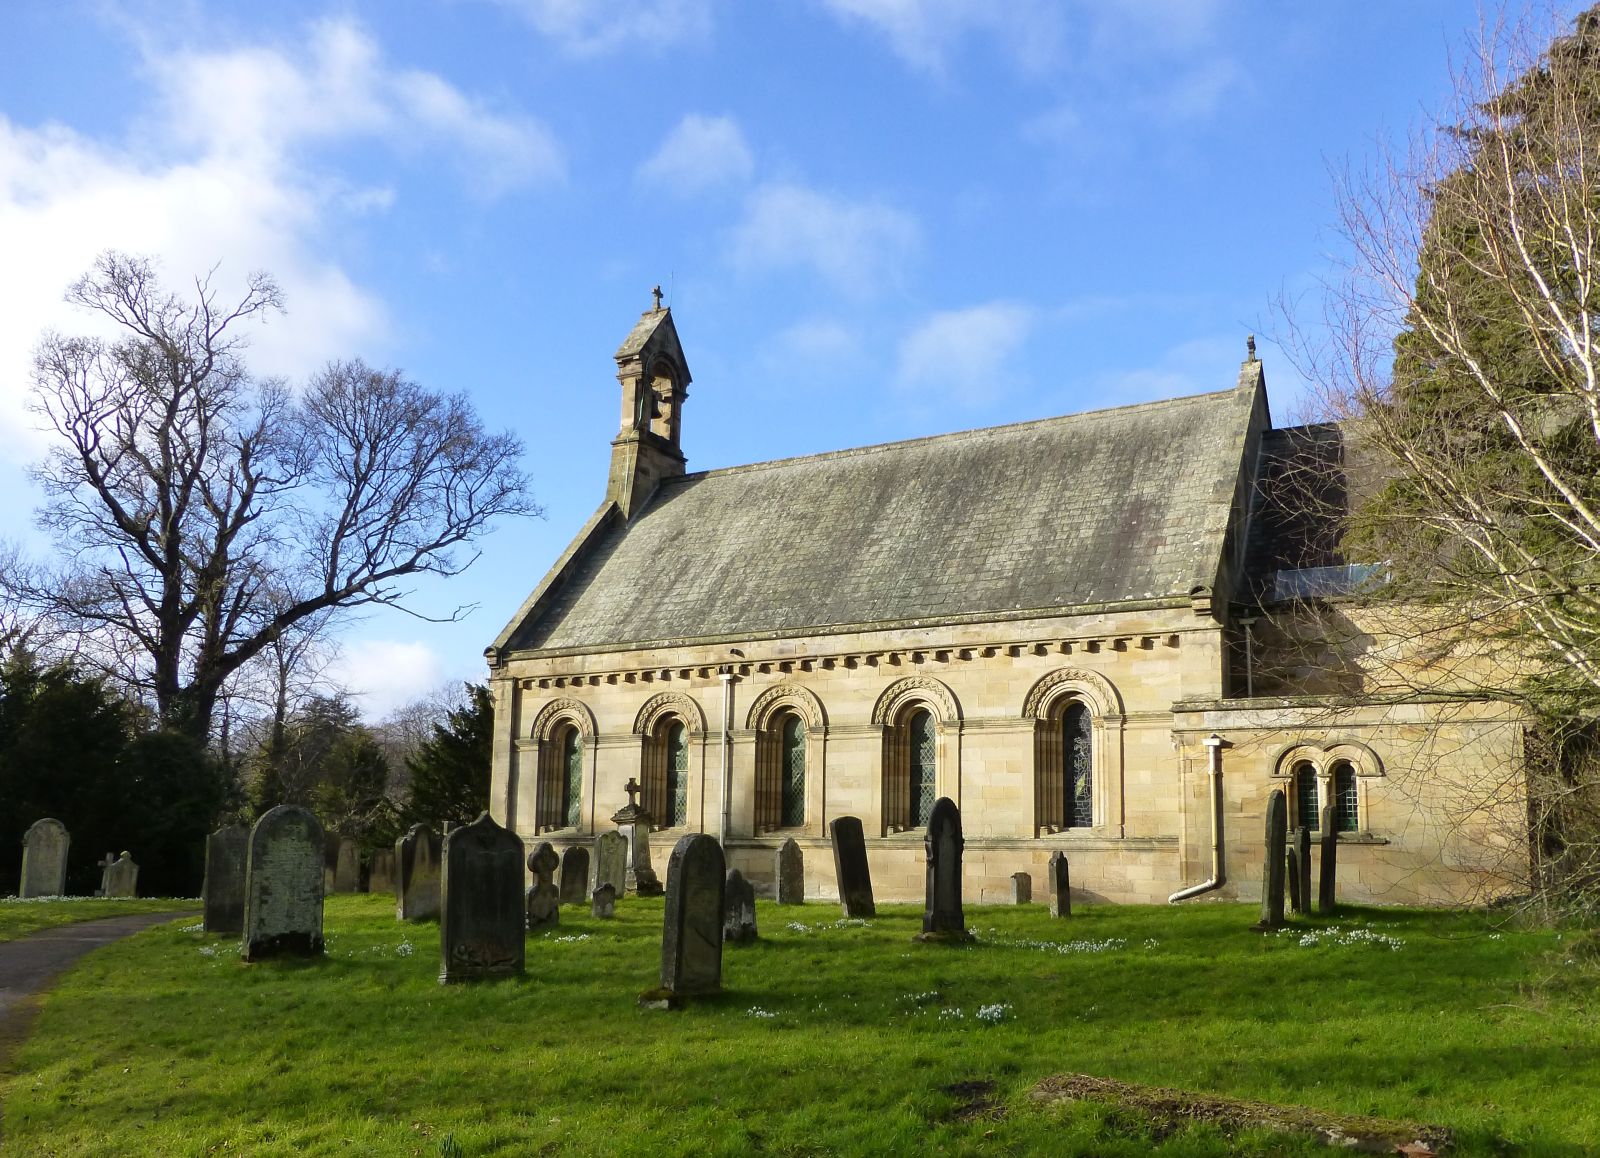 St Michael and All Angels Church (Howick, Northumberland)